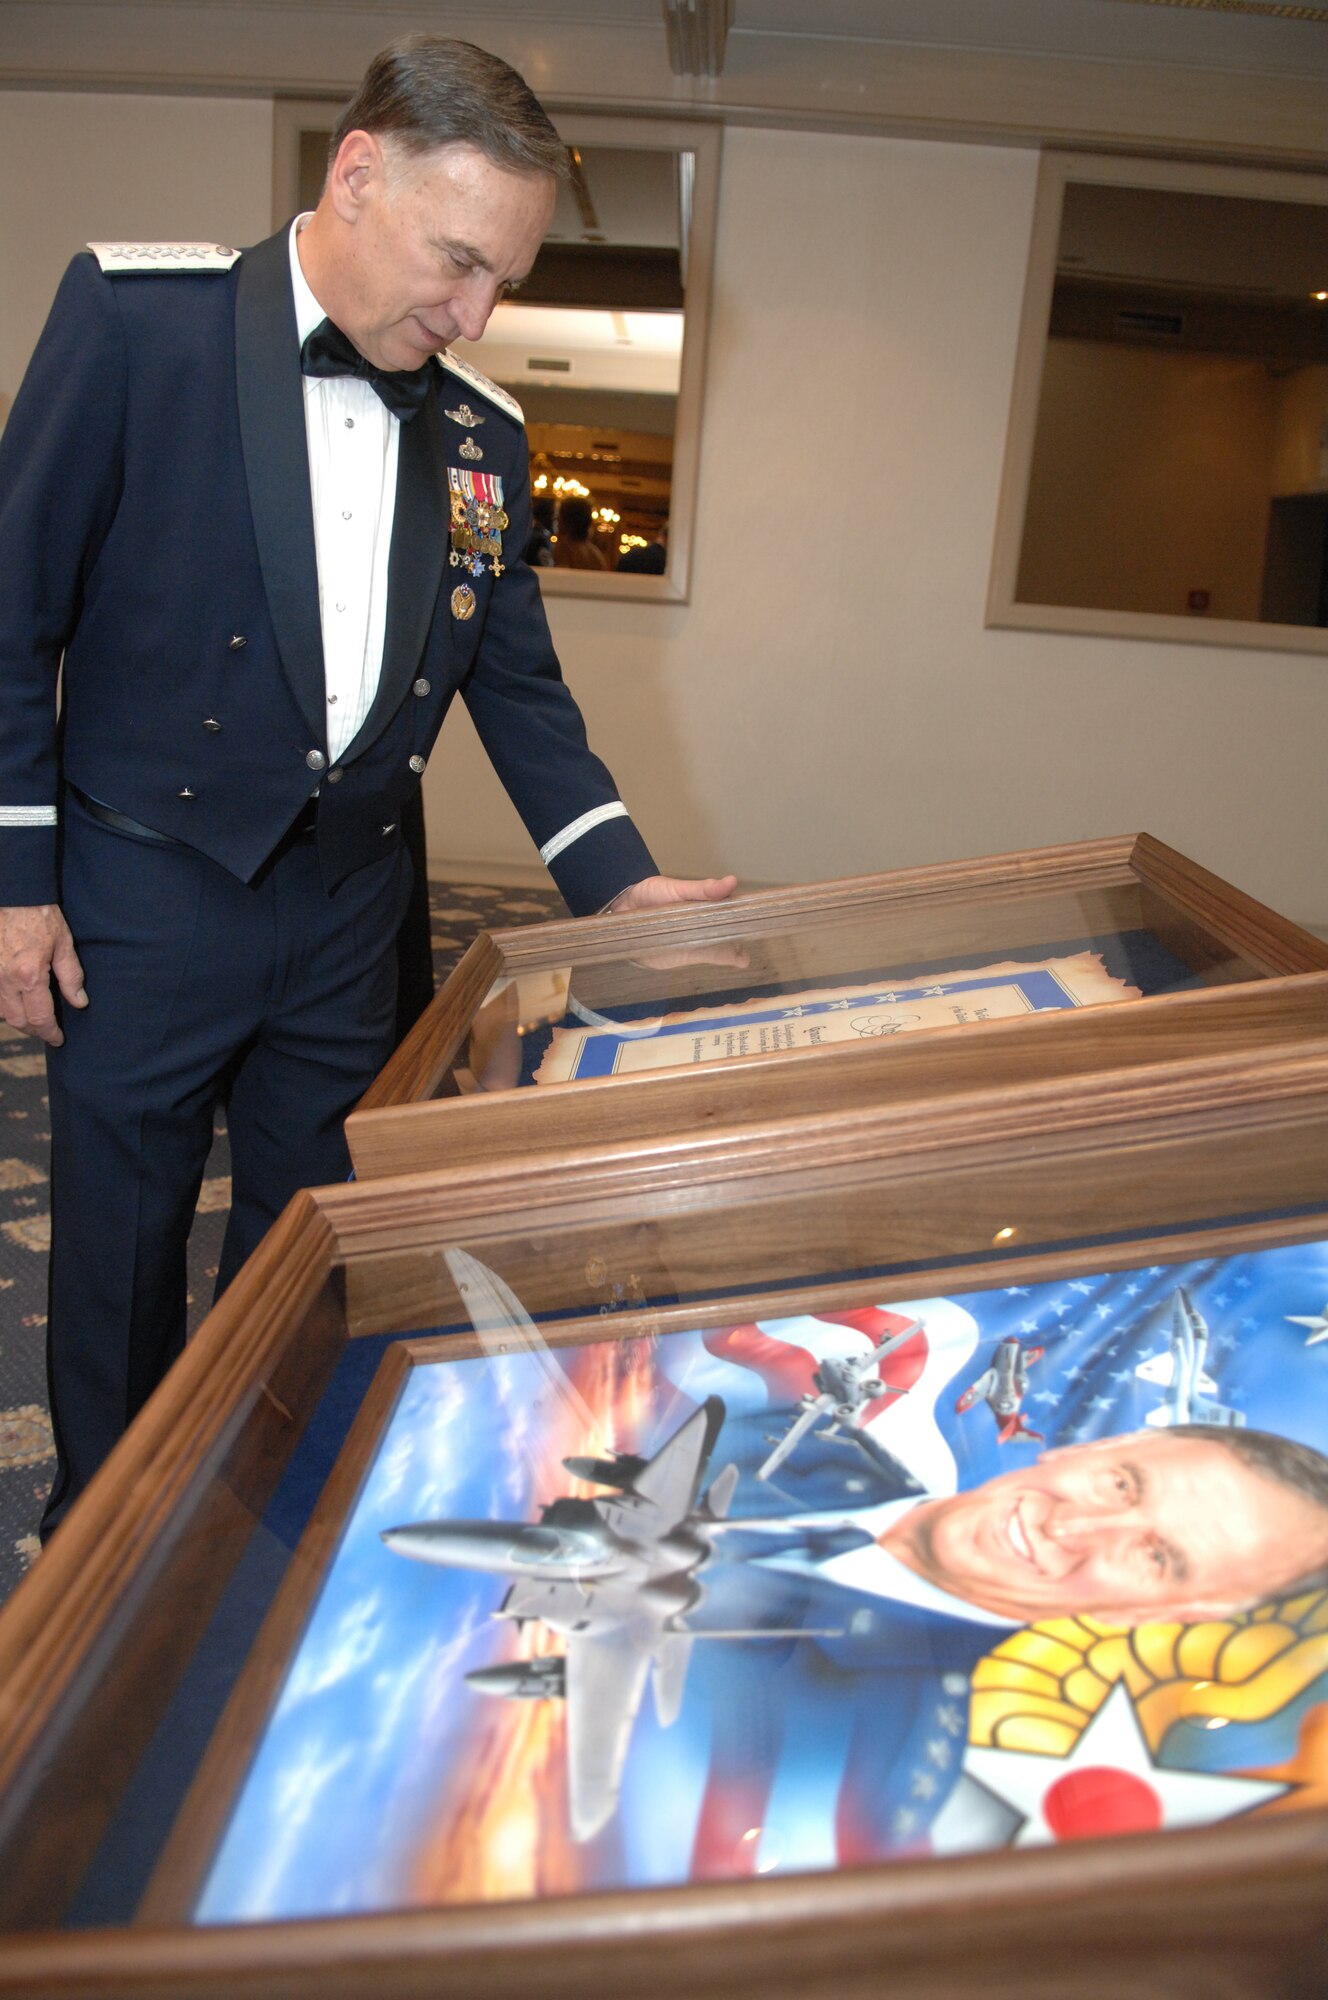 U.S. Air Forces in Europe Commander, General William T. Hobbins, admires some of the gifts he received during a USAFE order of the sword induction ceremony in his honor. The order of the sword induction is the highest honor the enlisted corps can bestow on an individual. (U.S. Air Force photo by Tech Sgt. Corey Clements)